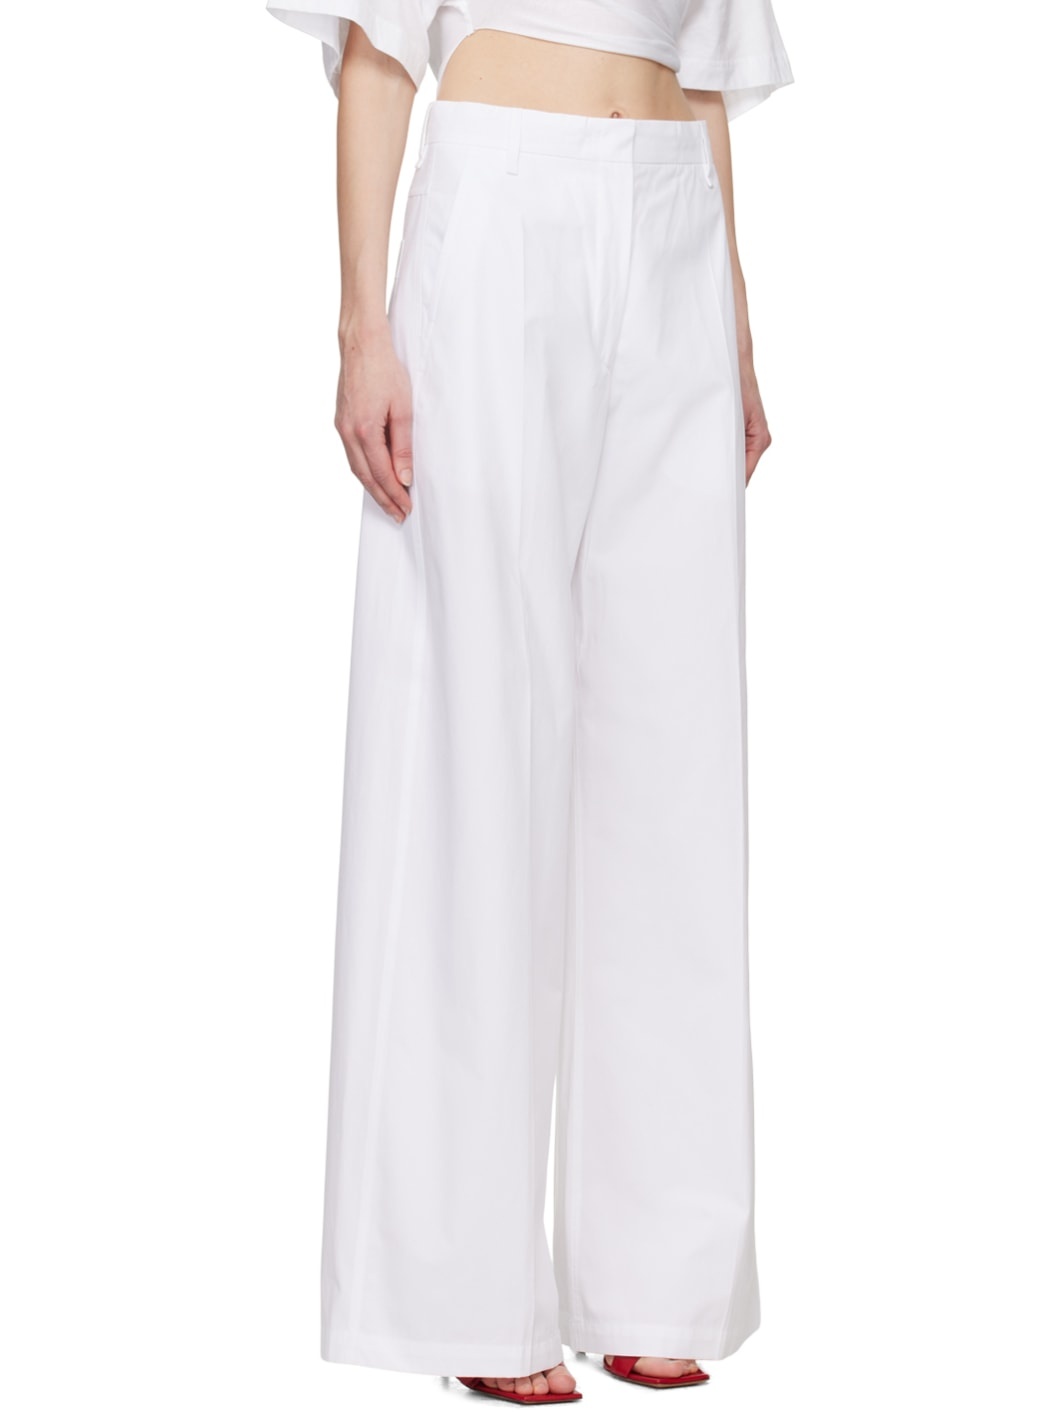 White Gebe Trousers - 2